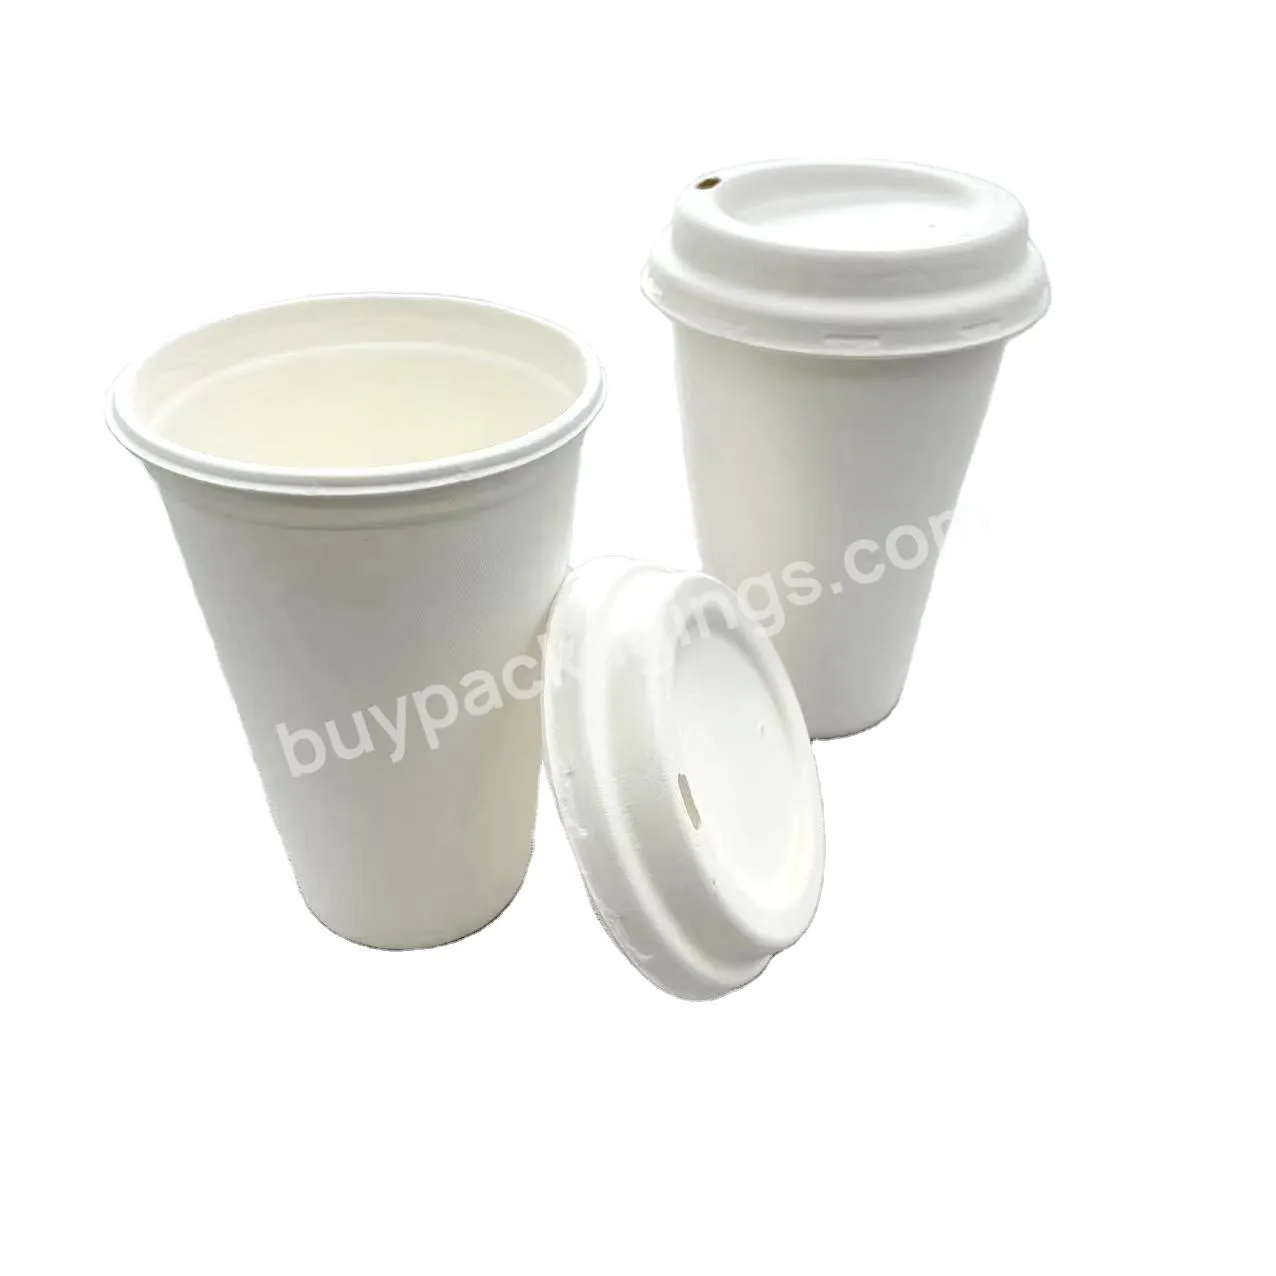 Bamboo Bagasse Fiber 100% Biodegradable Disposable Cafe Coffee Drinkware Paper Cup For Hot And Cold Drinks